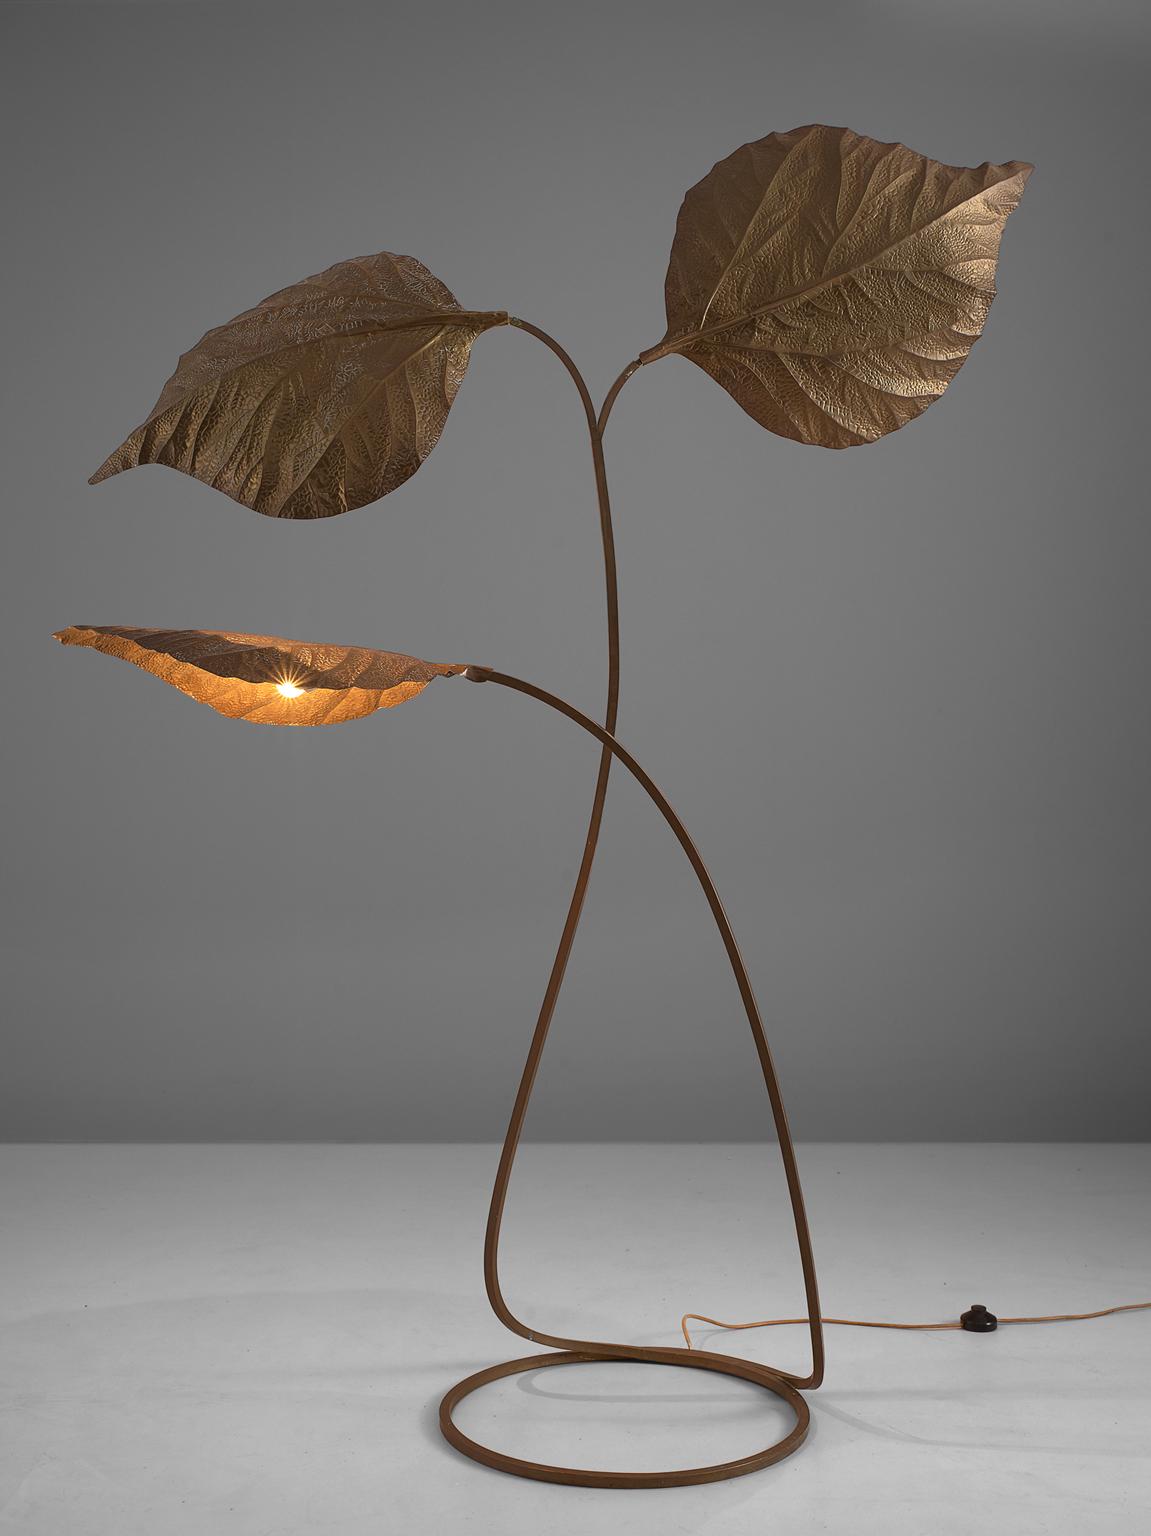 Carlo Giorgi for Bottega Gadda, brass 'rhubarb' leaf lamp, Italy, 1970s.

This large triple leaf floor lamp is designed by Carlo Giorgi and produced in Italy in the 1970s. This biomorphic, hand-hammered brass floor lamp resembles three large